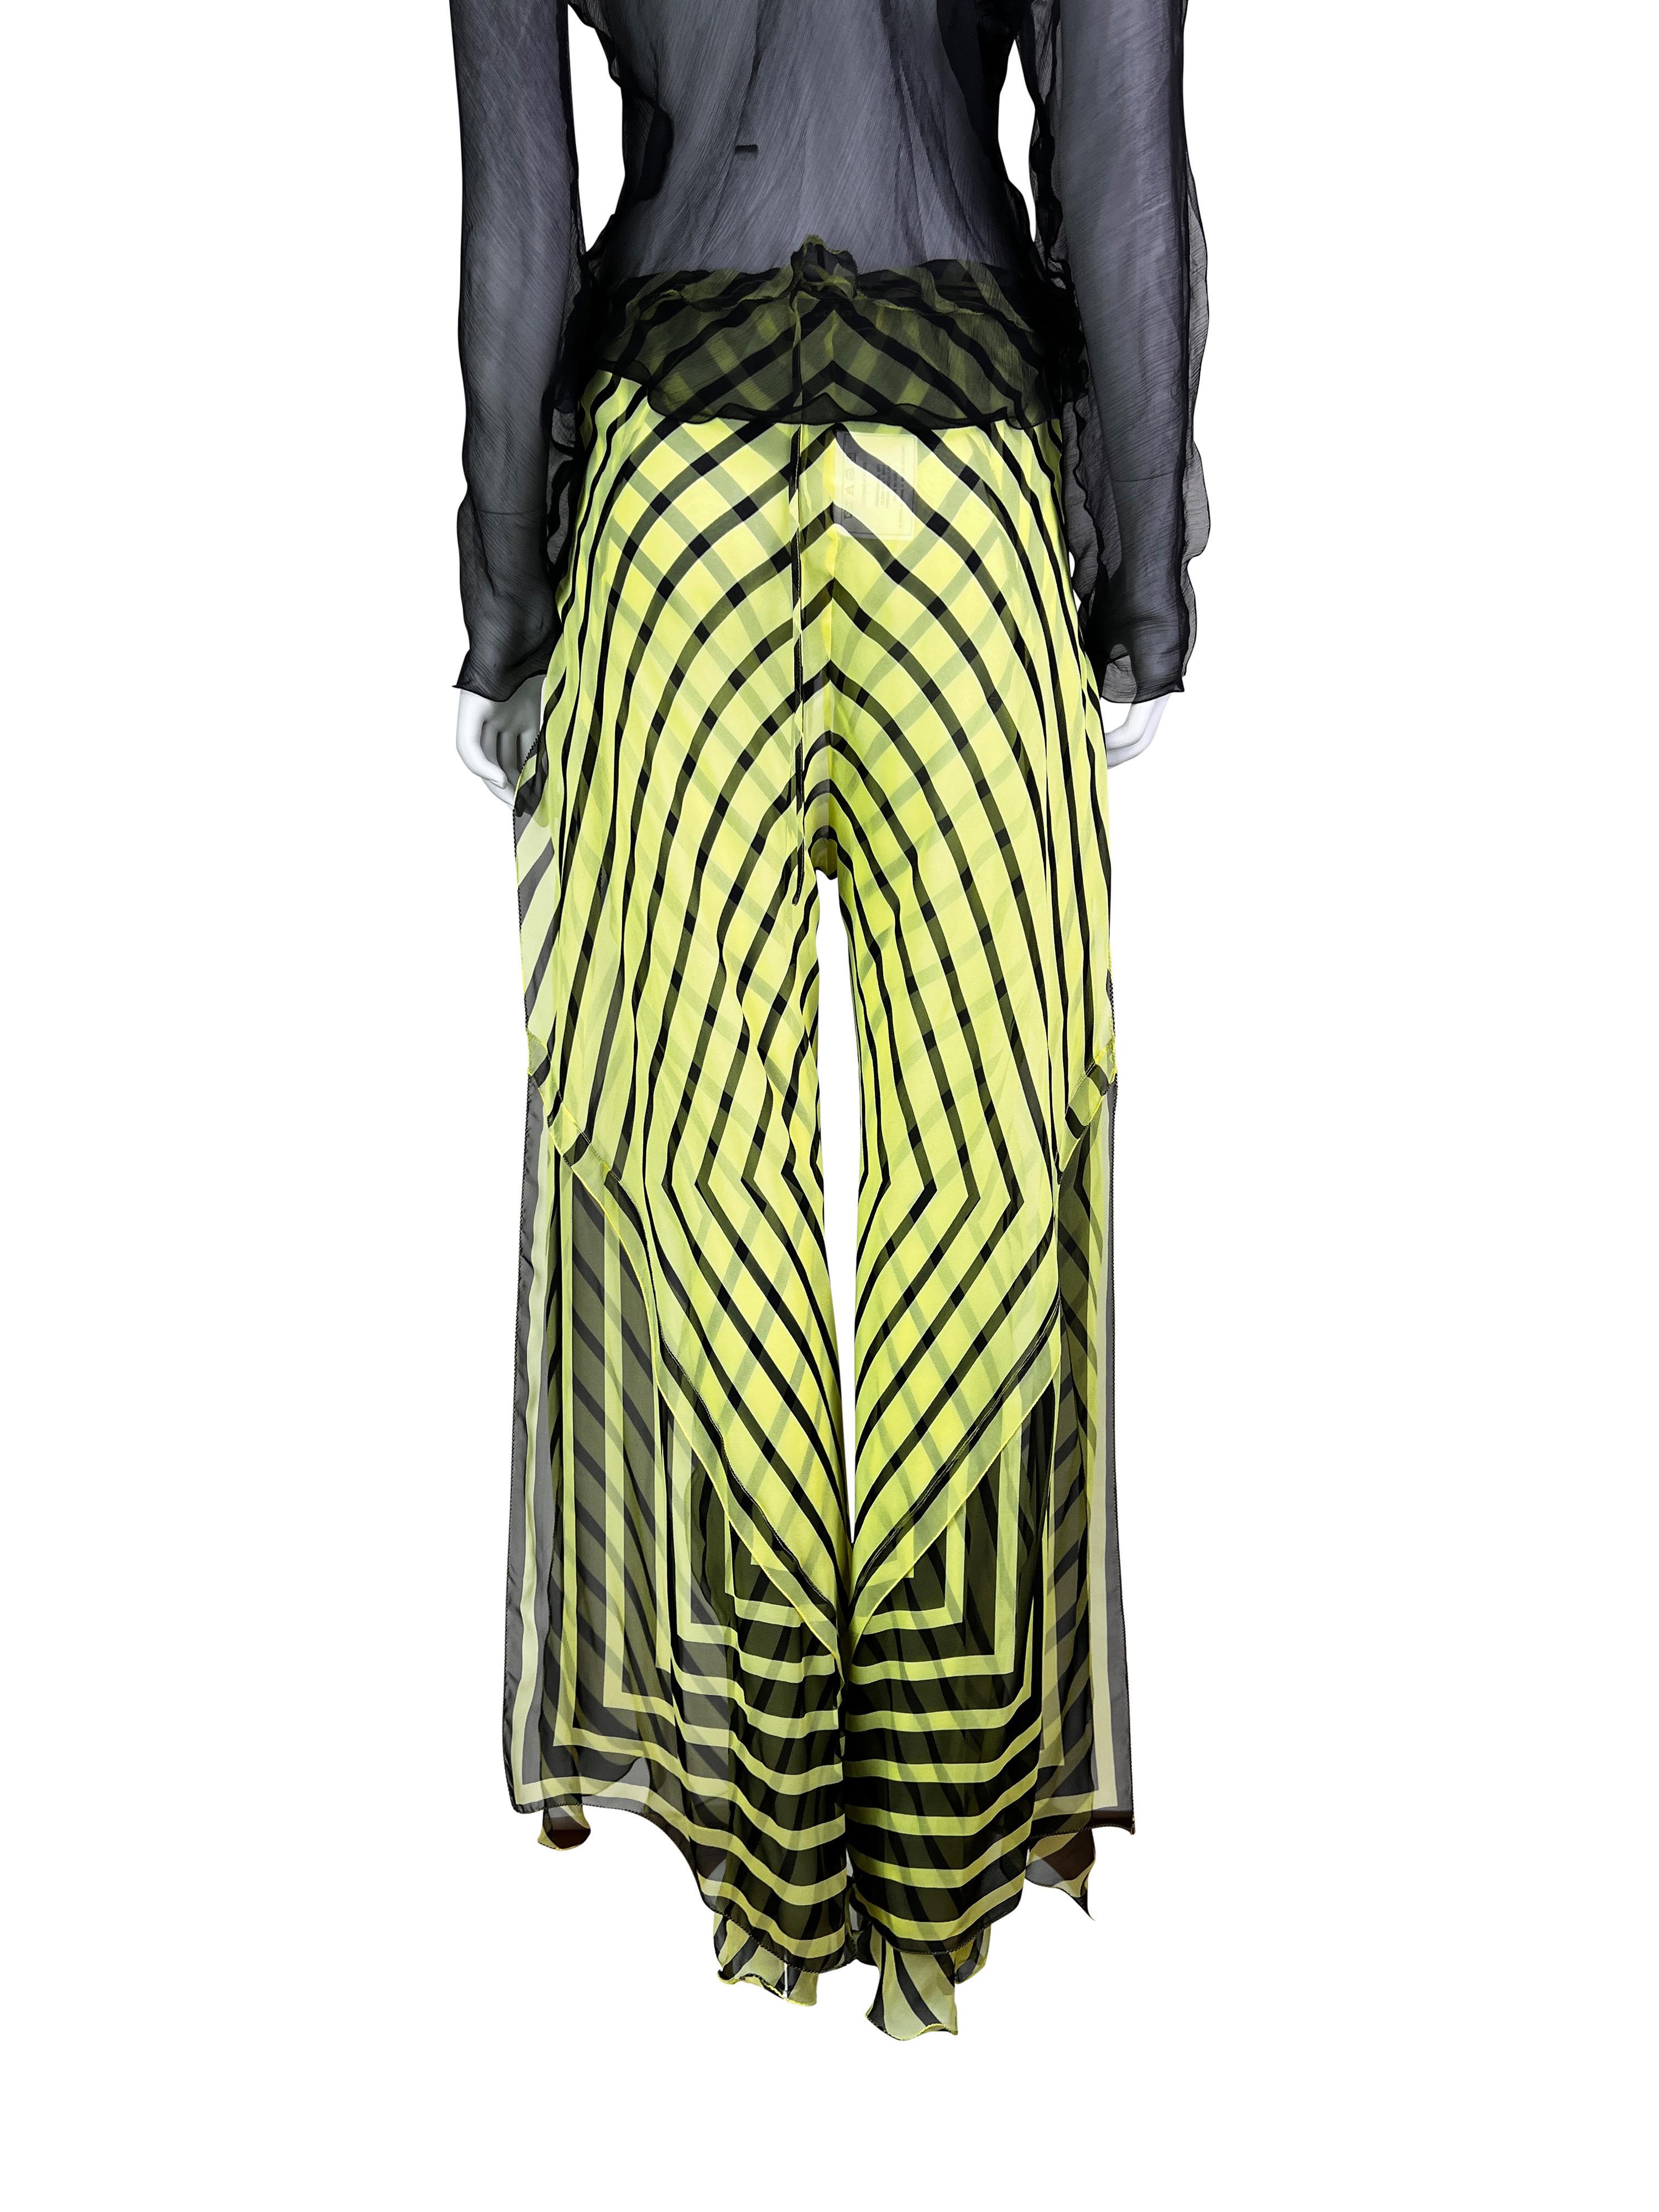 Fendi by Karl Lagerfeld Spring 2000 Doubled Layered Graphic Lime Bias-Cut Silk T For Sale 2